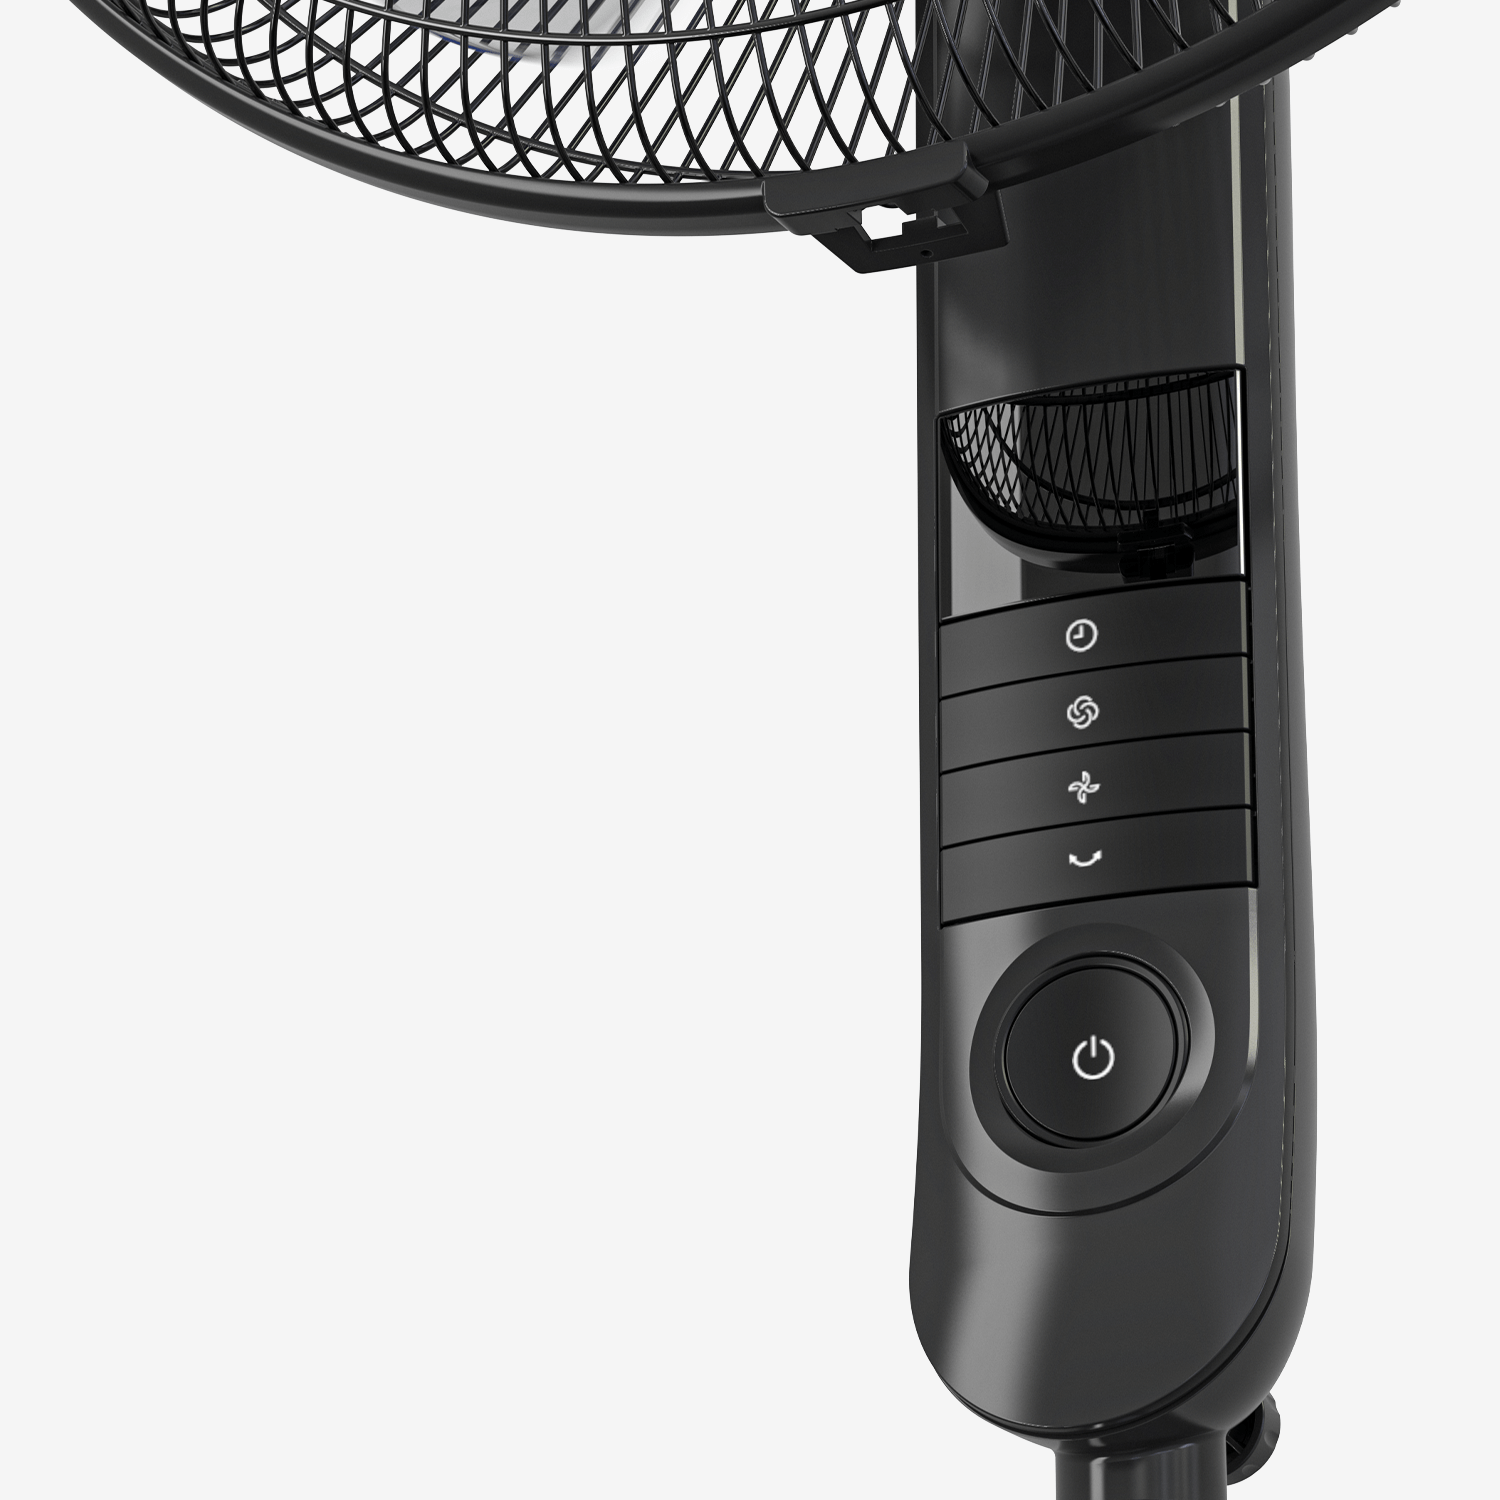 16" Pedestal Fan with 4 Fan Modes and Remote Control - Black